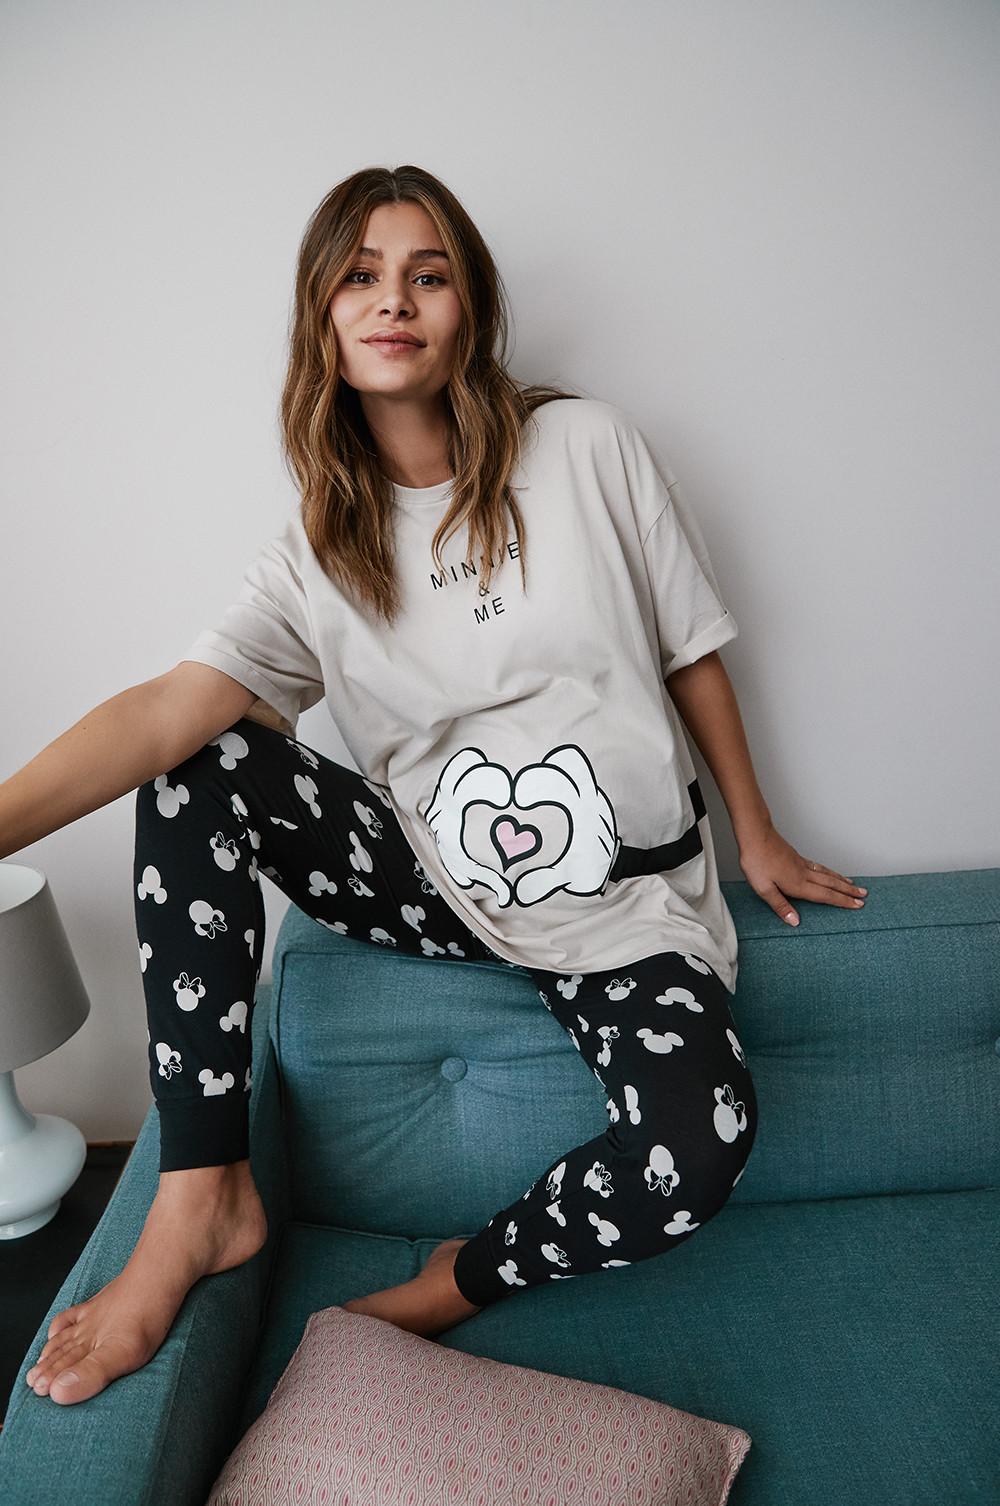 model sits on teal coloured sofa, wearing grey minnie mouse pyjamas